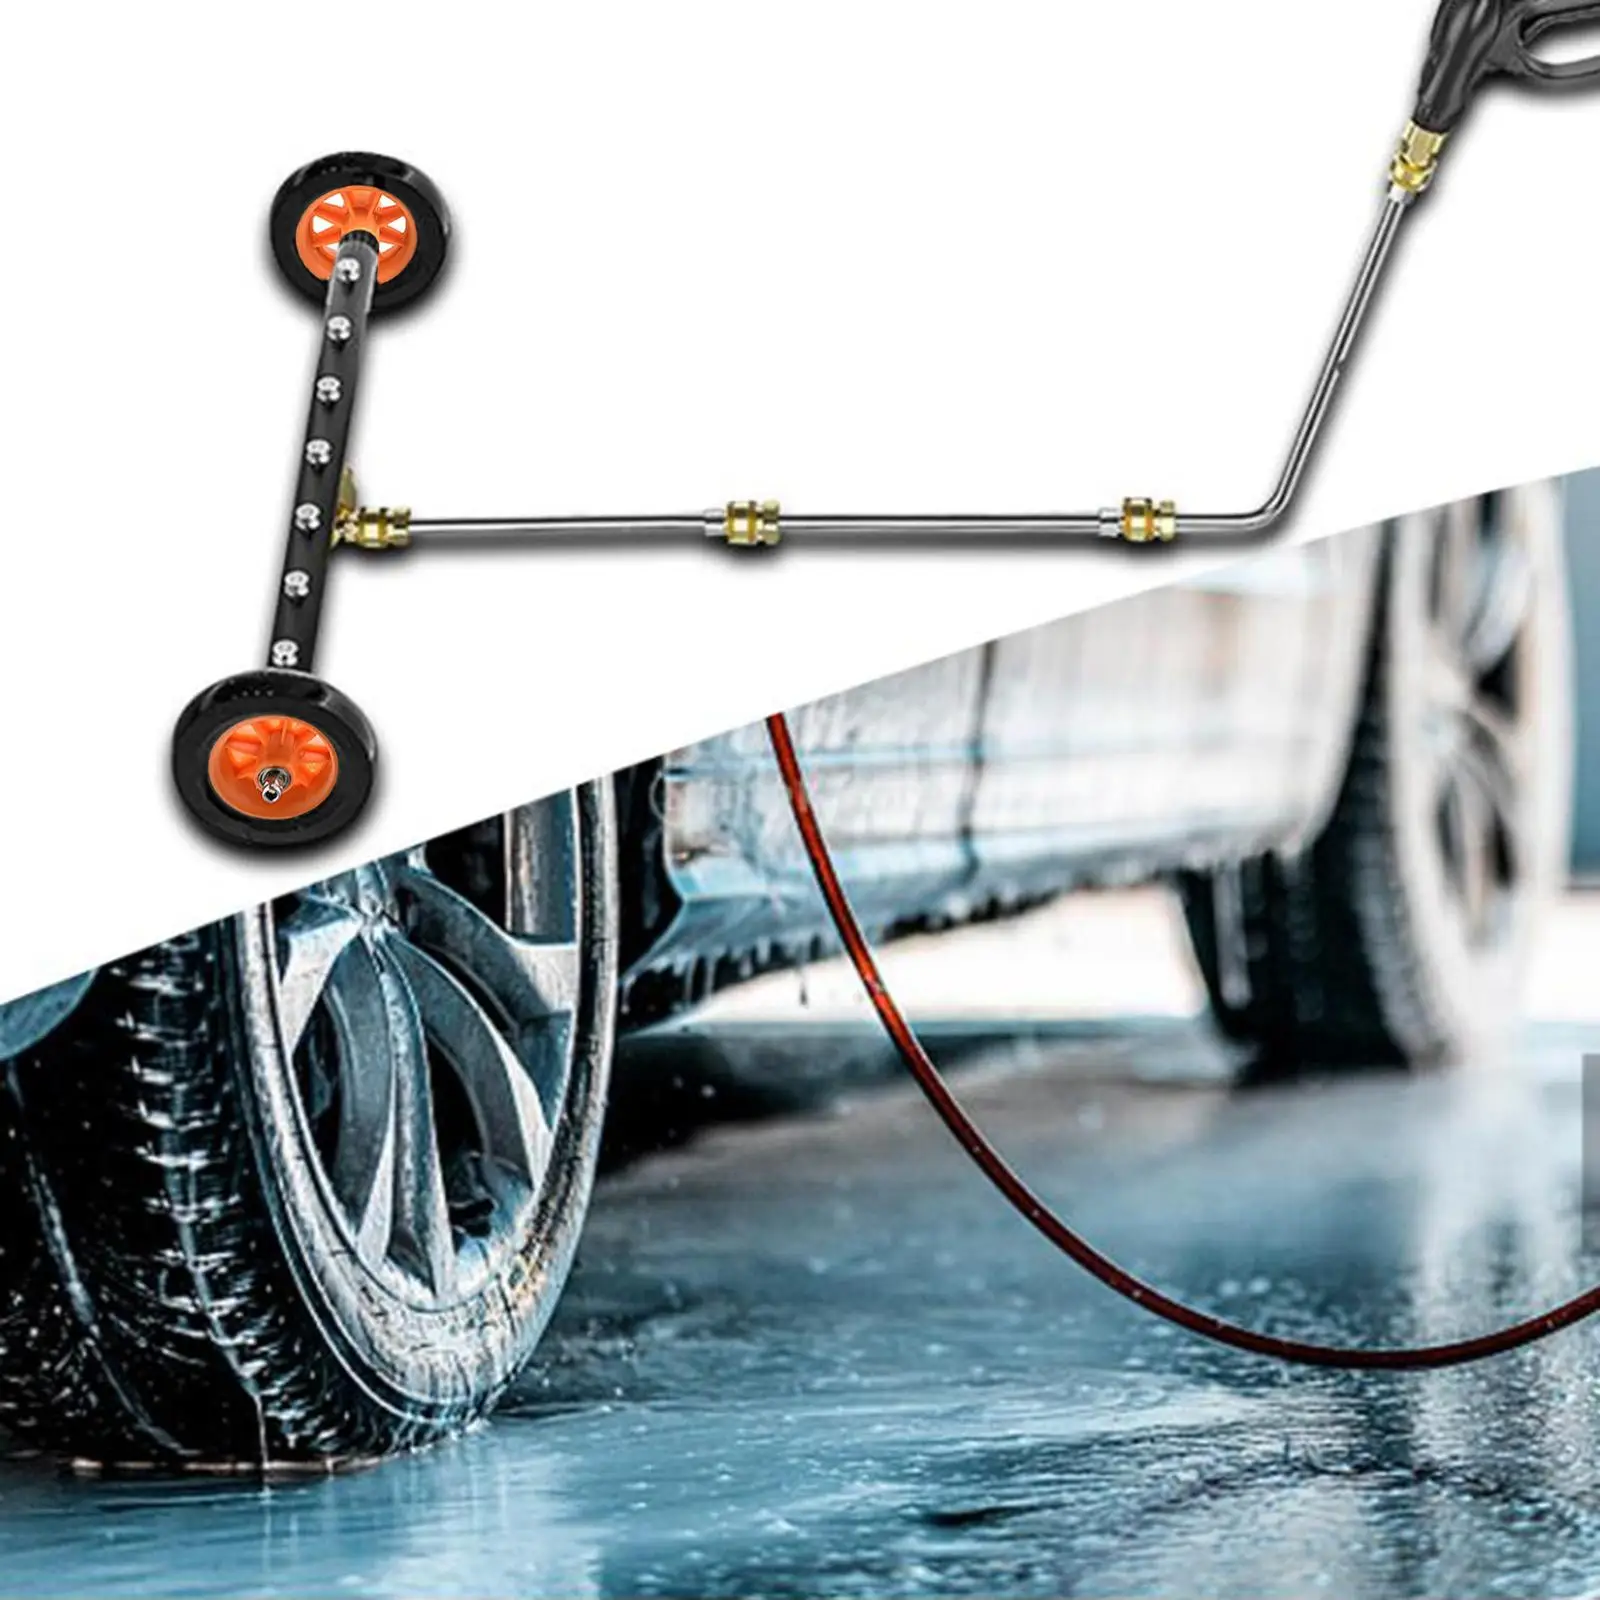 under Car Washer Water Broom 4000PSI with Extension Wands 7 Nozzles Pressure Washer Undercarriage Cleaner for Truck Car Vehicles